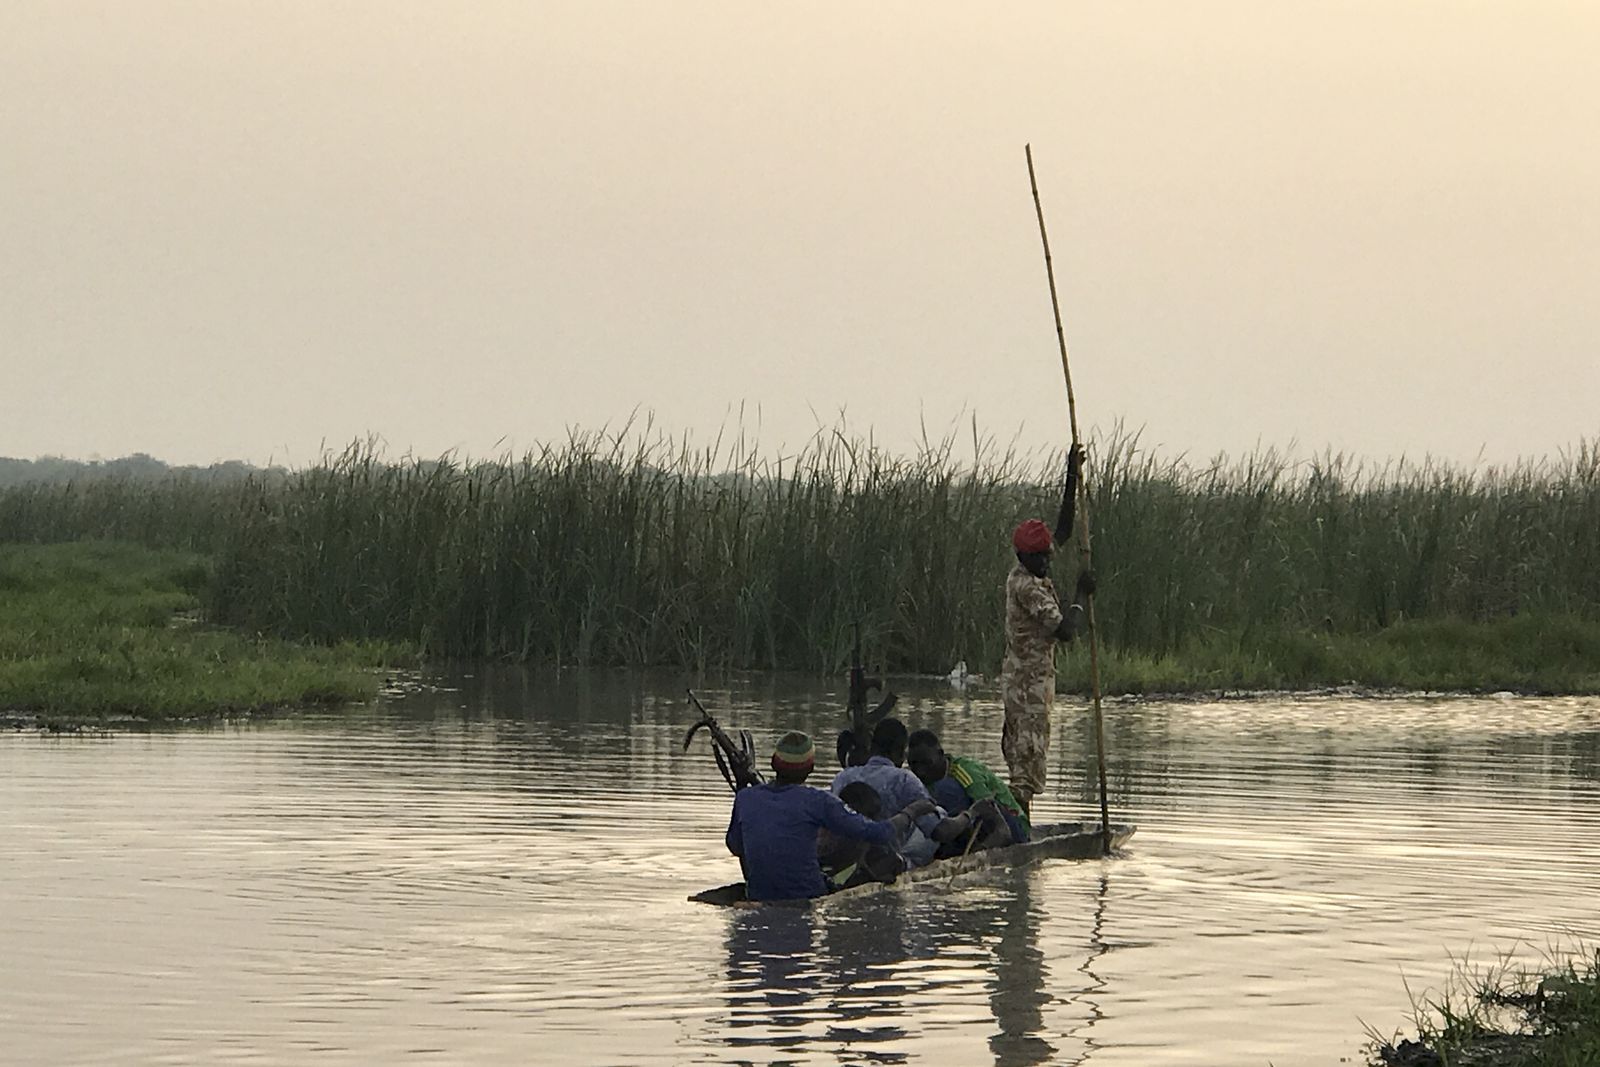 In Ganyiel village, South Sudan, rebels travel between posts on a traditional canoe. Image by Jane Ferguson. South Sudan, 2017.